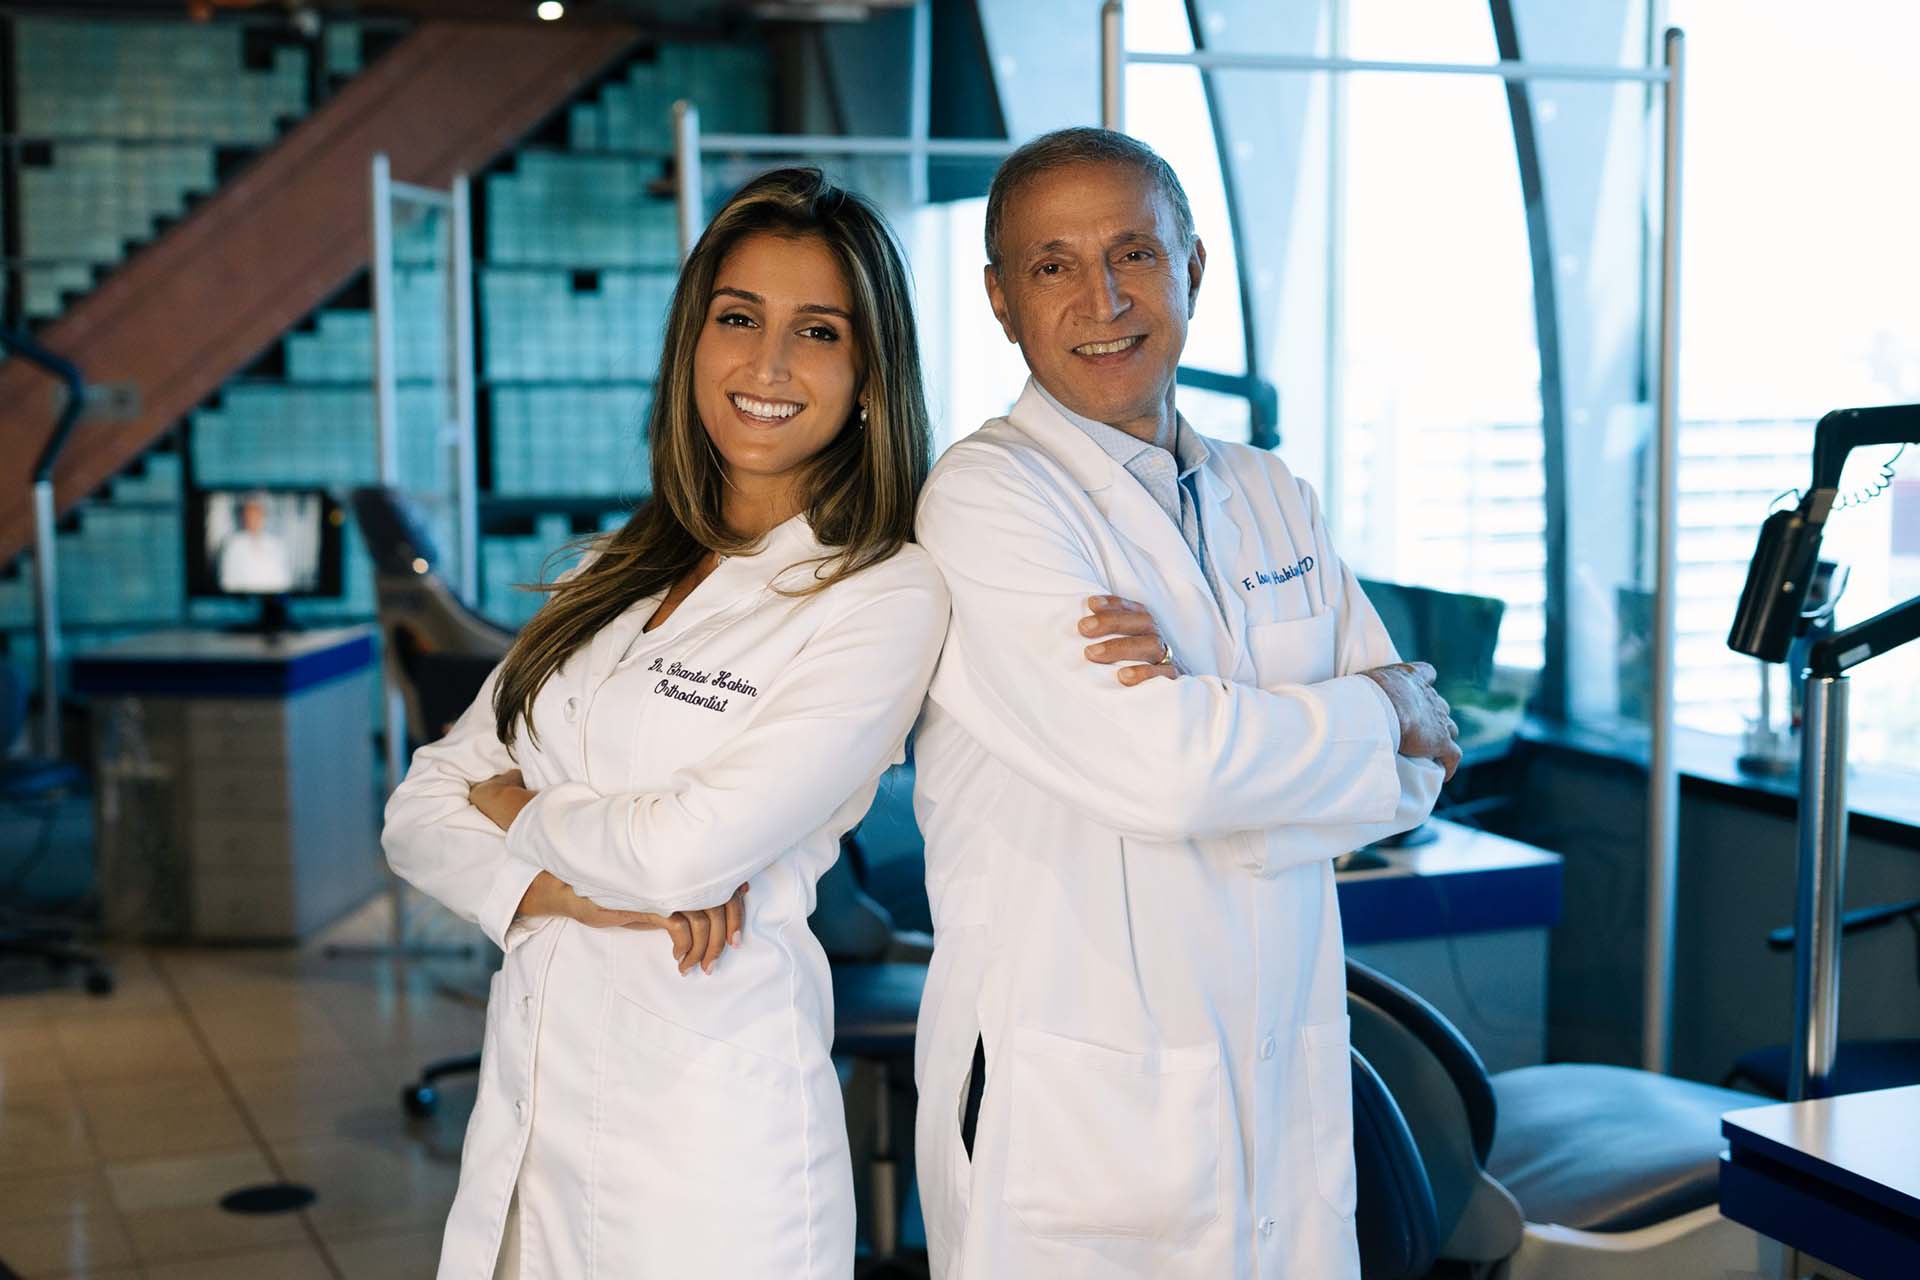 Dr. Chantal Hakim and Dr. F. Isaac Hakim at the Orthospaceship in Los Angeles, a Southern California orthodontic practice serving Sherman Oaks, Los Angeles.